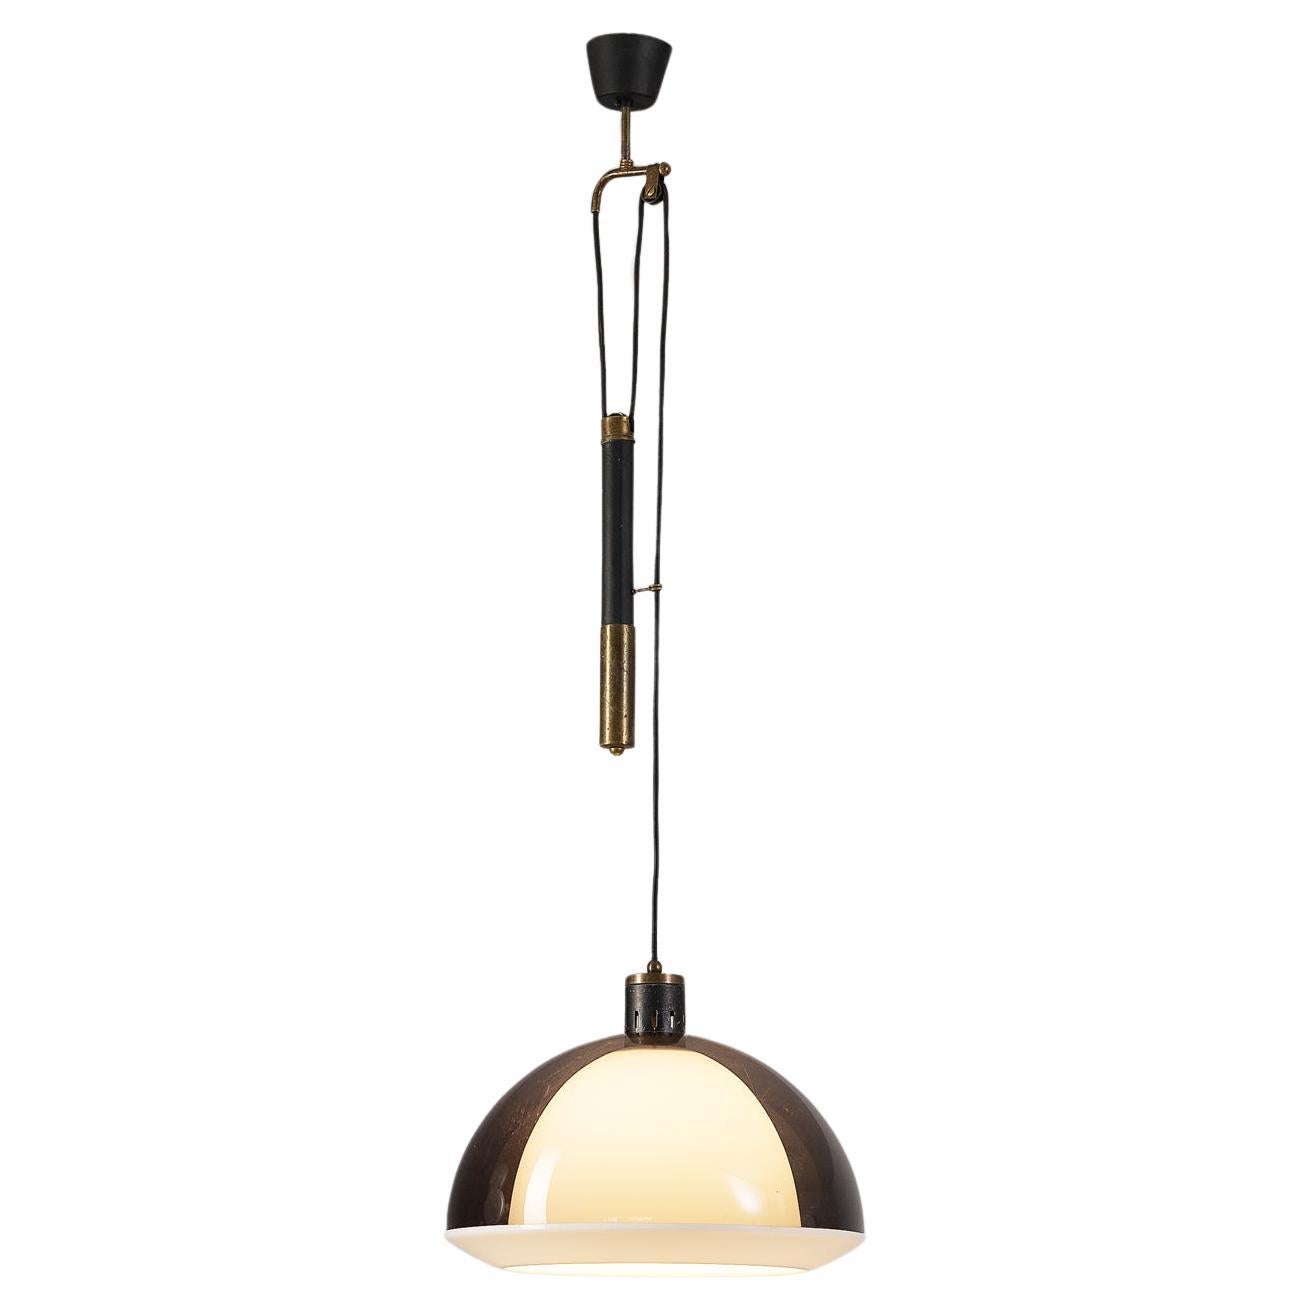 Stilux Italian Adjustable Pendant with Counterweight in Brass and Perspex